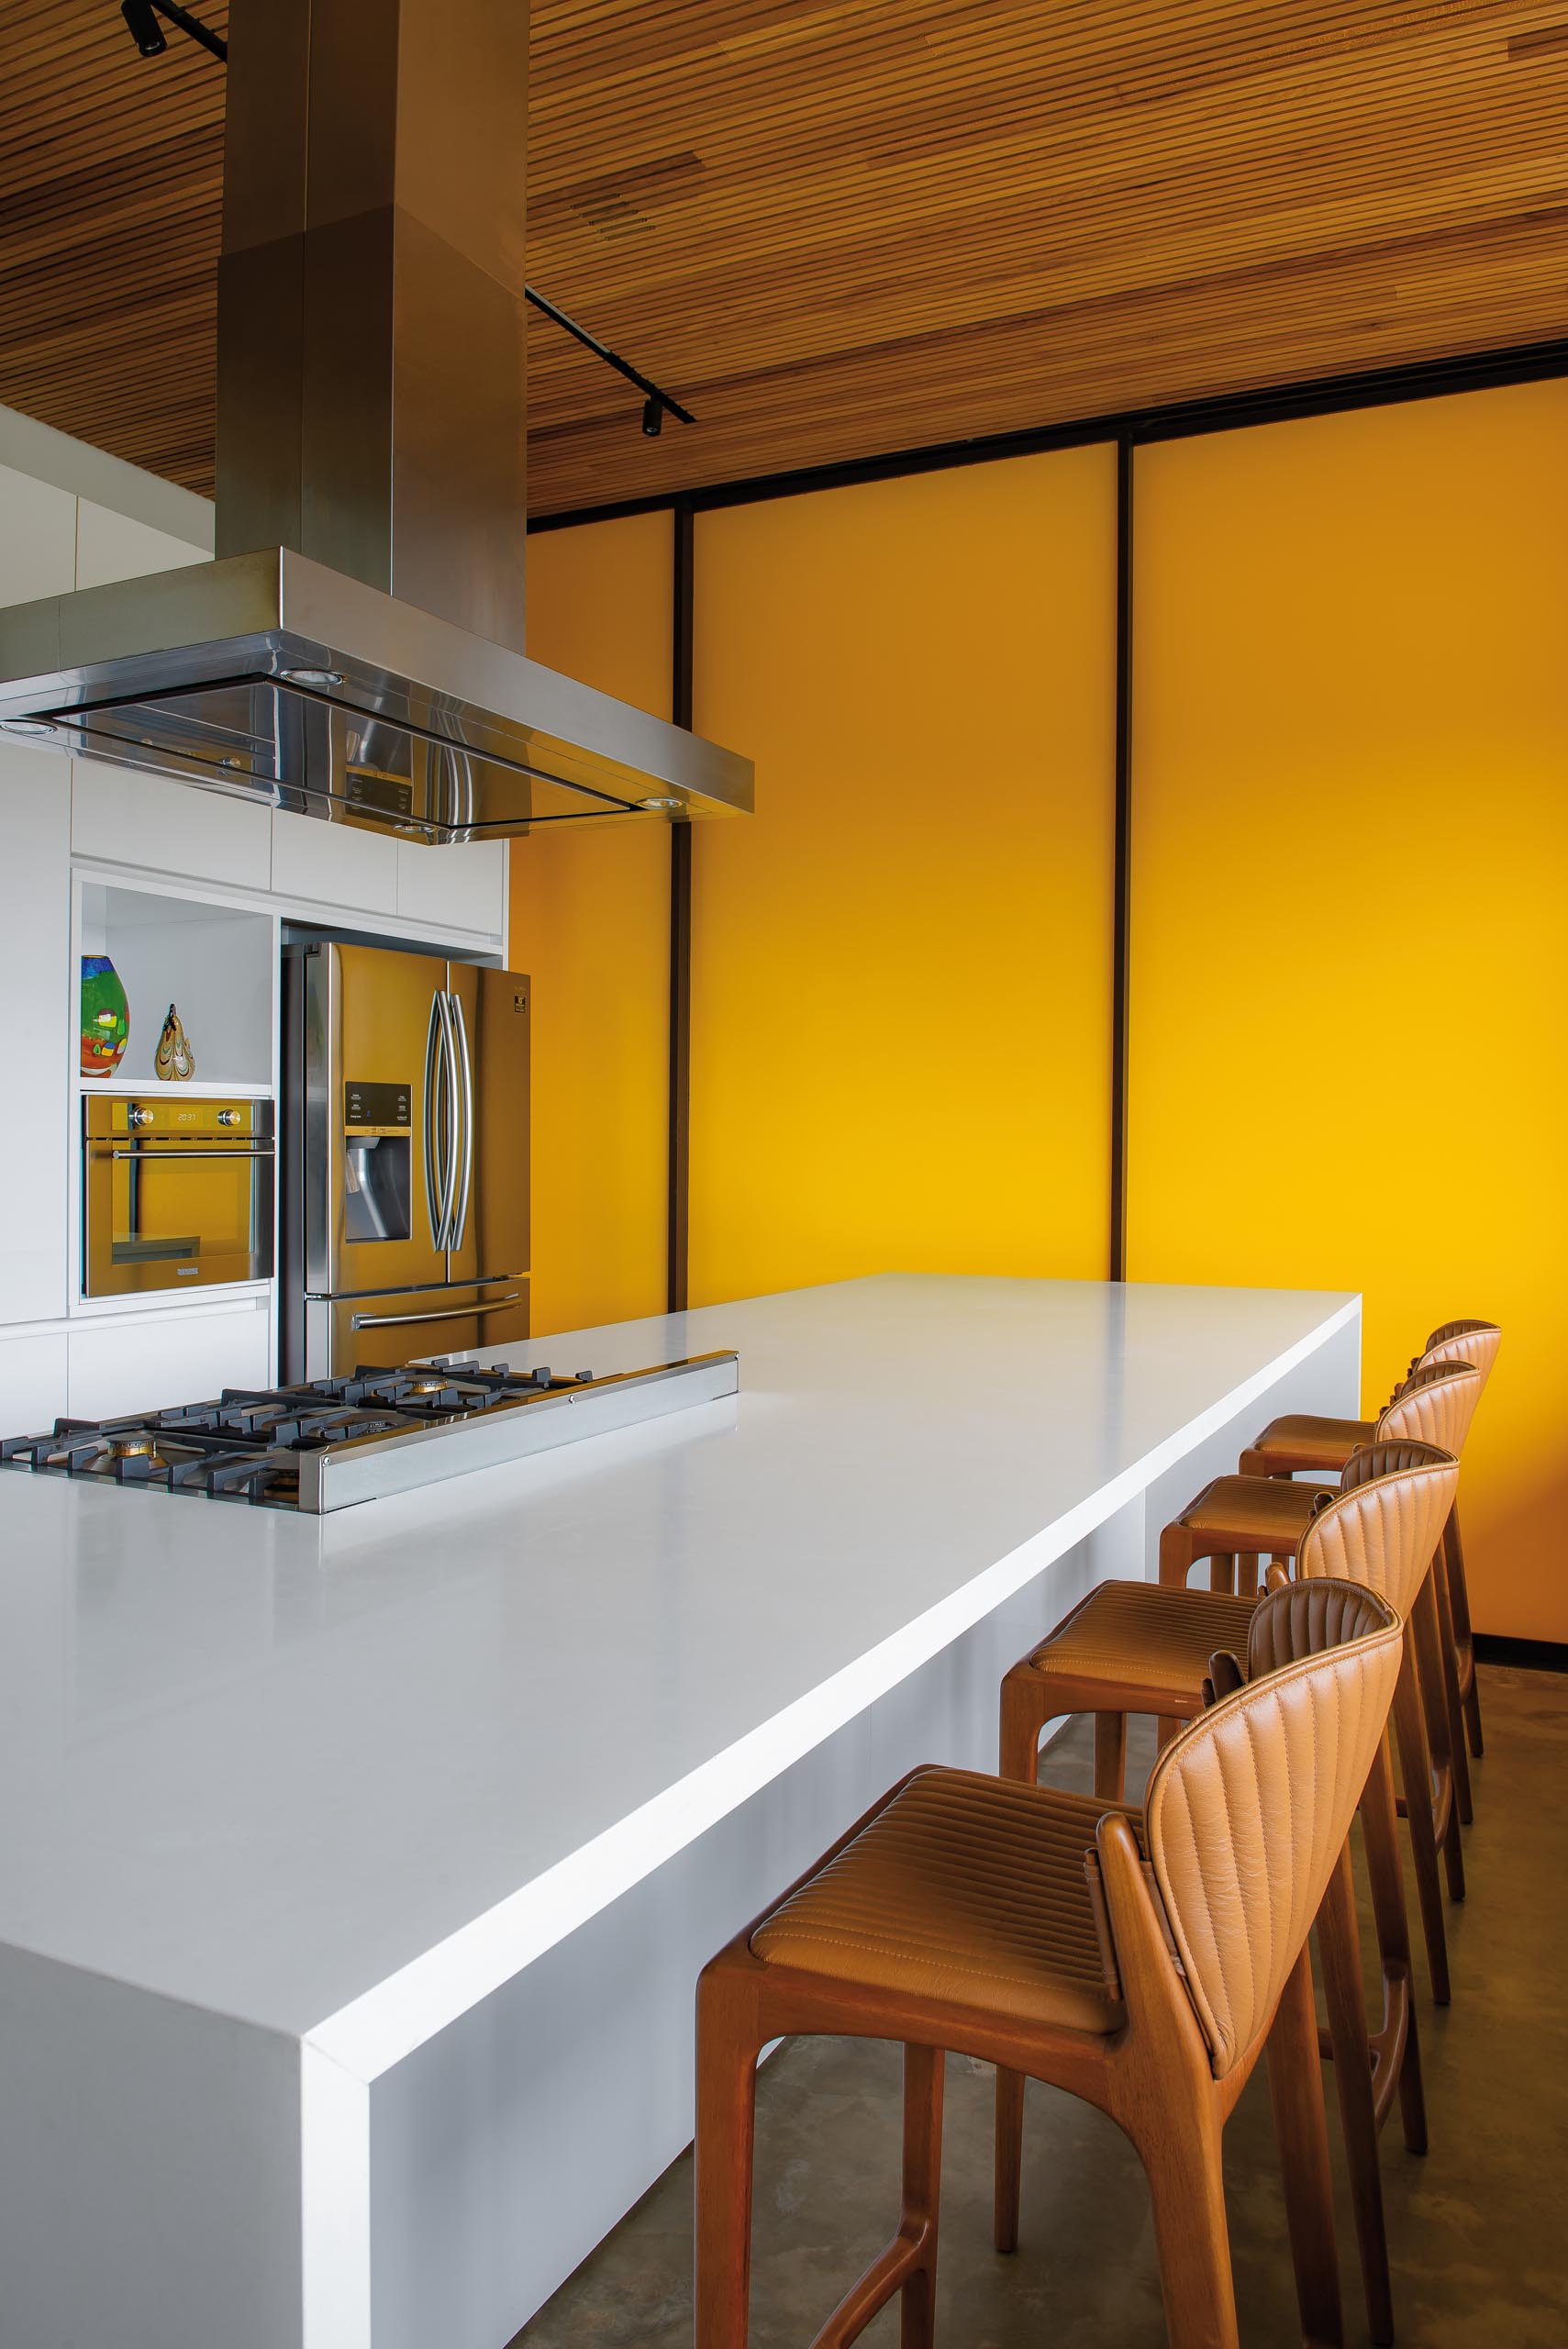 This modern kitchen has minimalist hardware-free white cabinets and island. A bright yellow accent wall creates a bold and colorful statement.